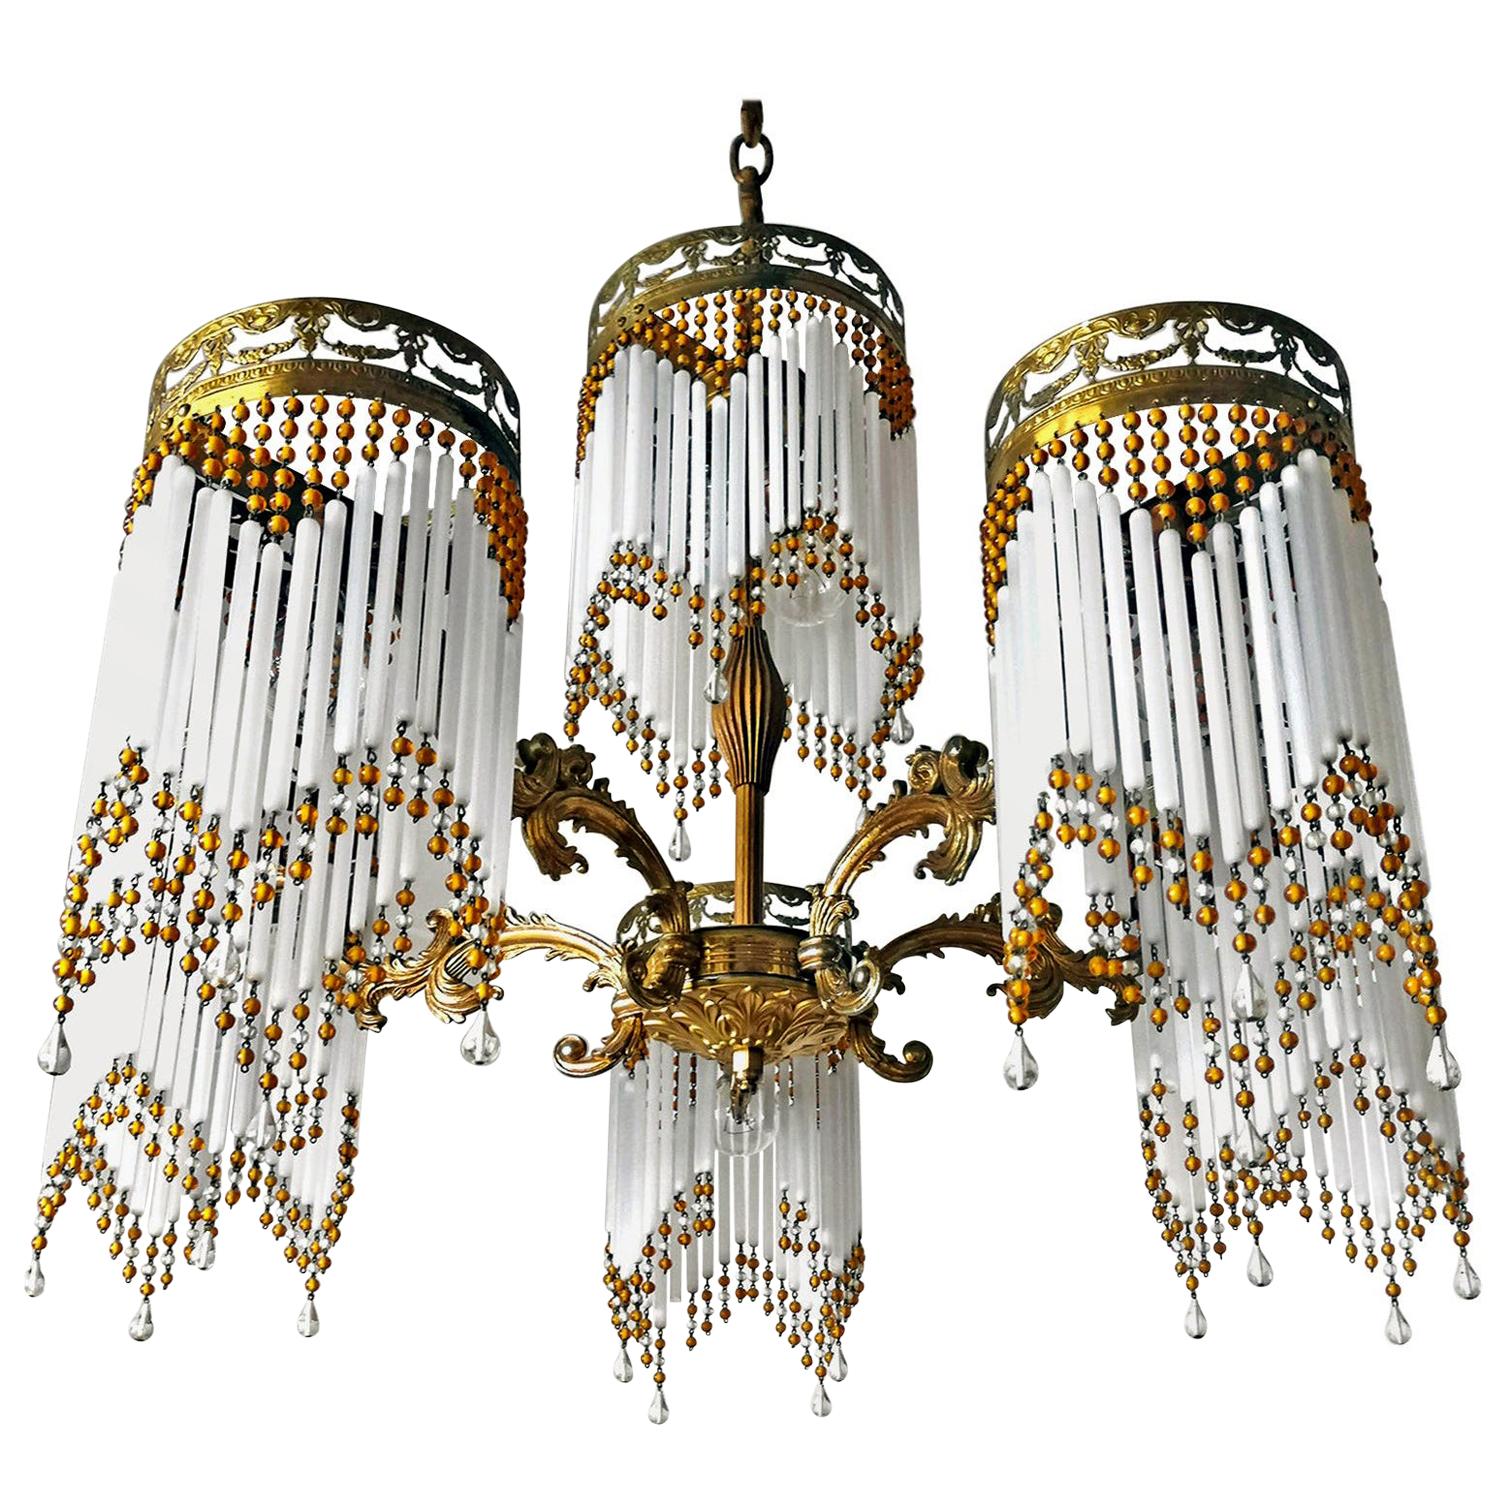 French Art Deco and Art Nouveau Amber Beaded Fringe and Gilt Ornate Chandelier